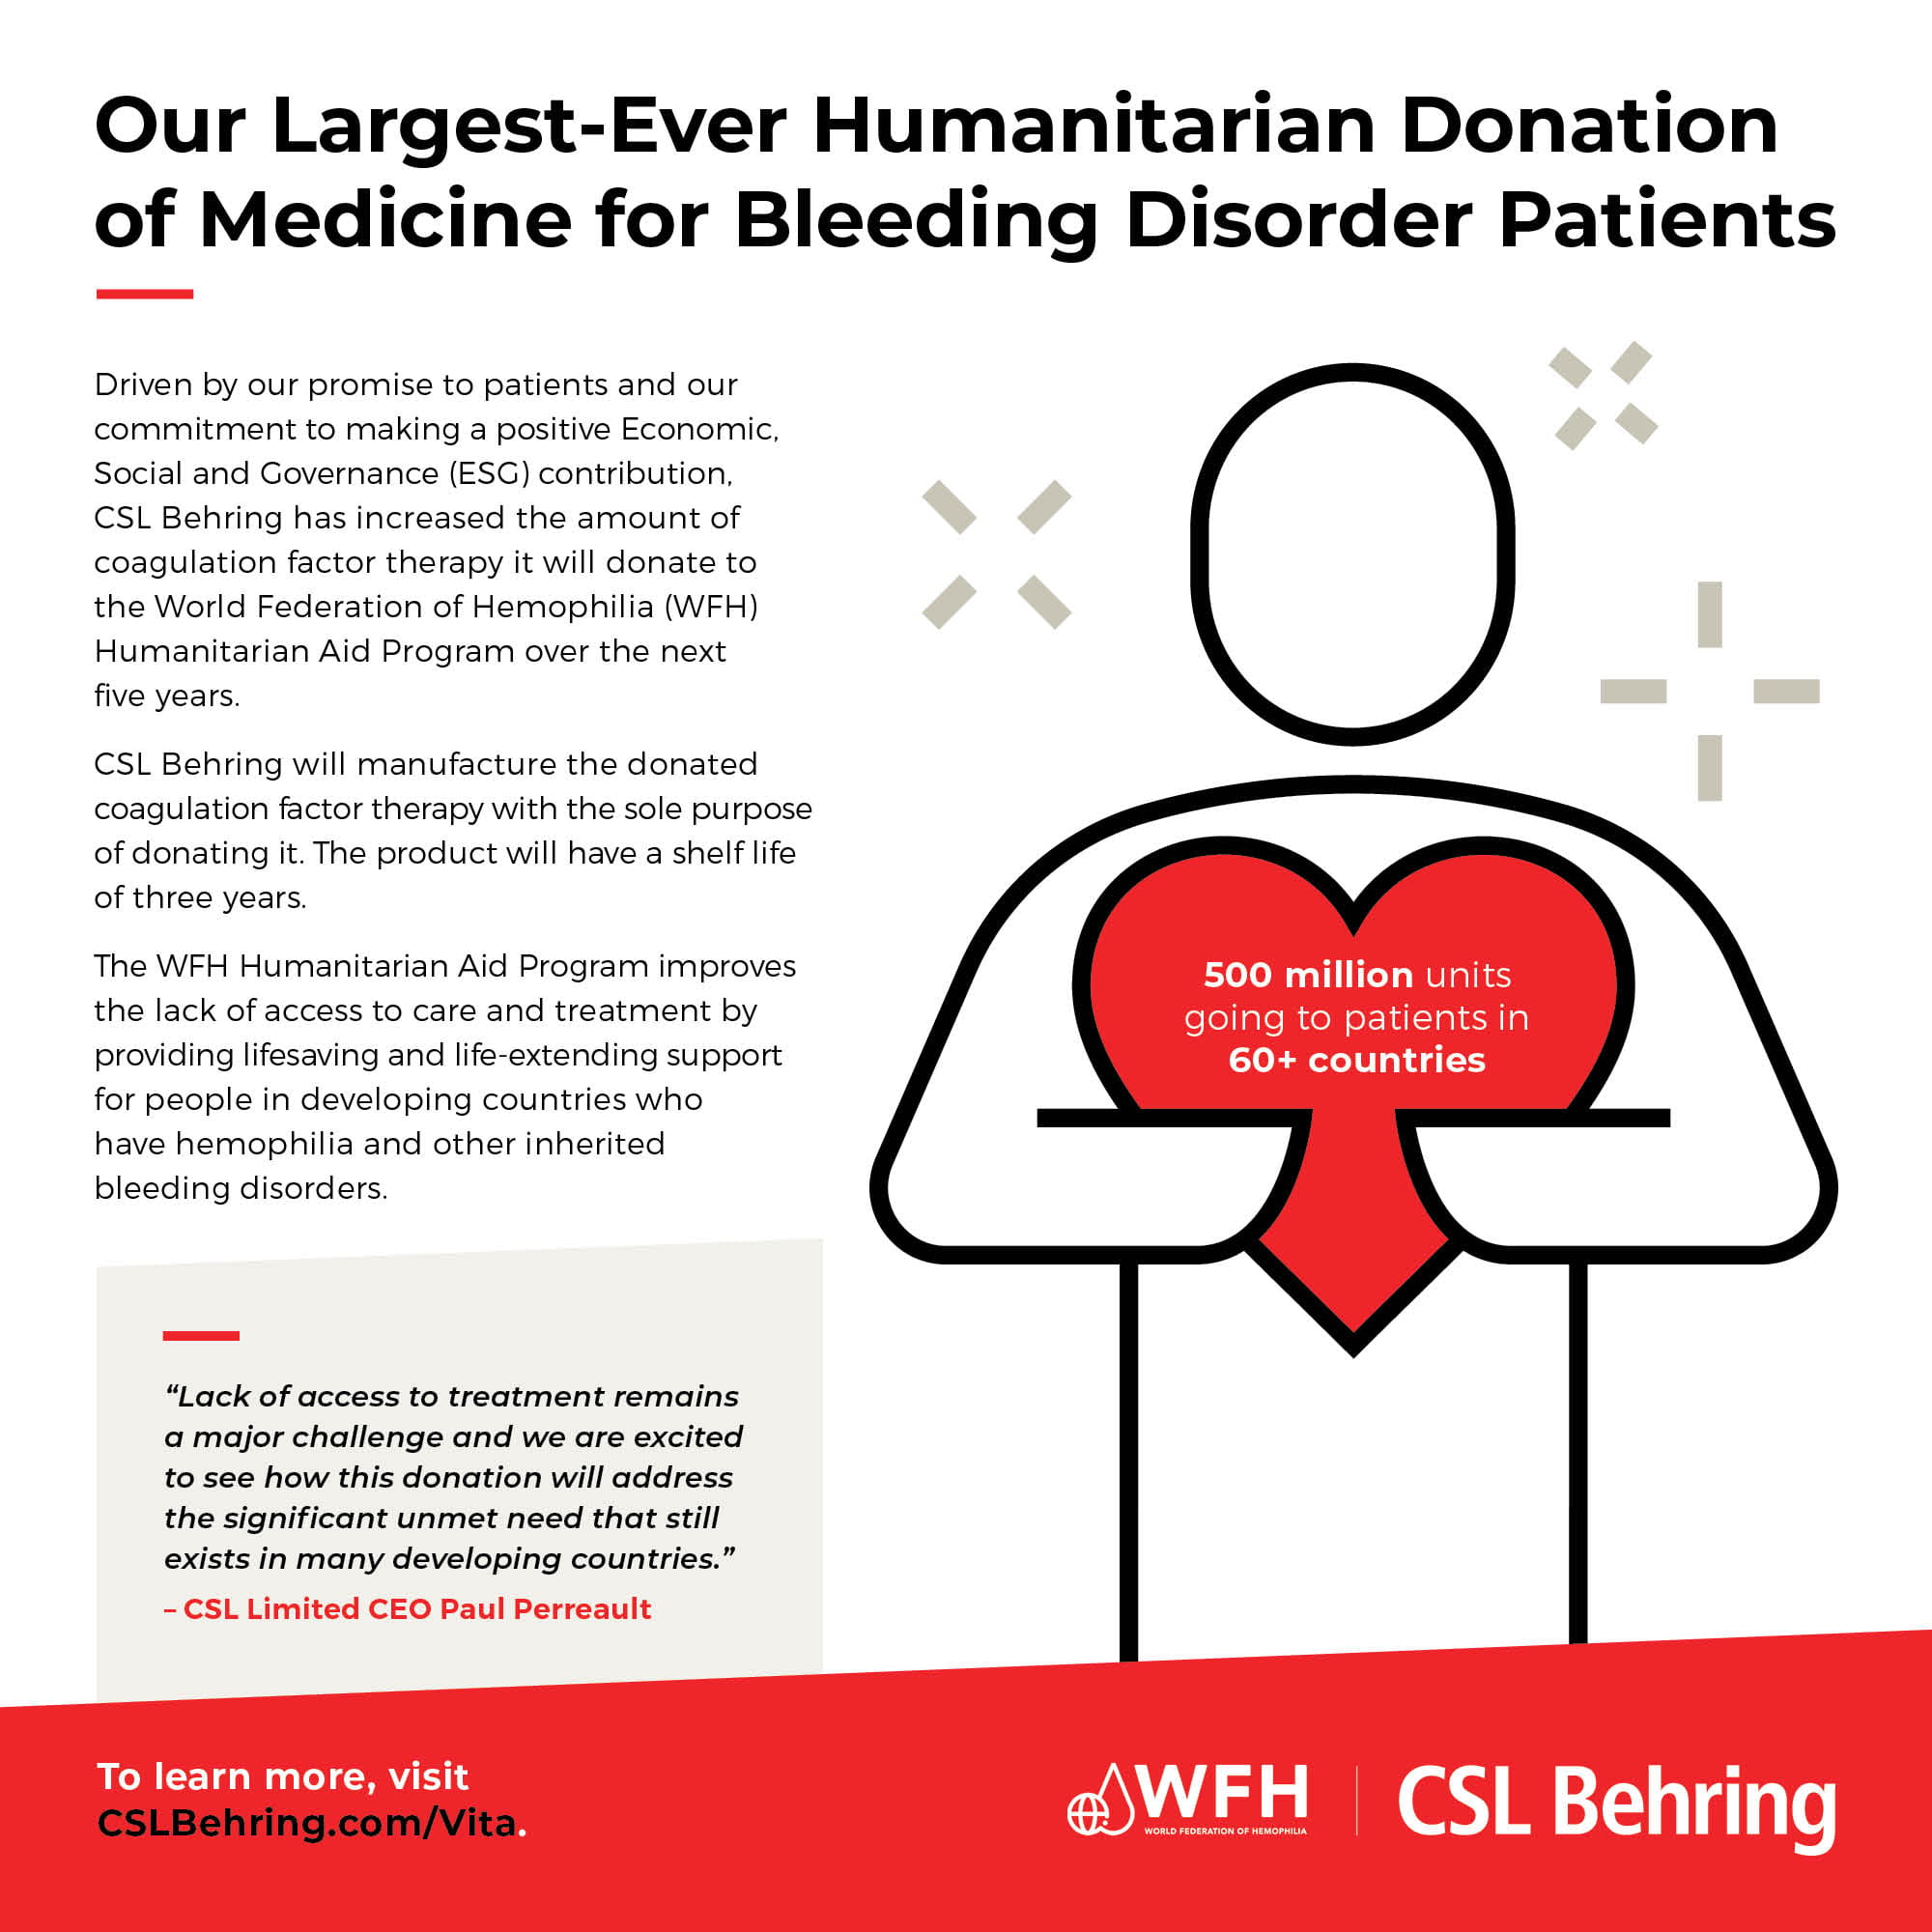 CSL Behring's Largest Humanitarian Donation of Medicine for Bleeding Disorder Patients - icon holding heart 